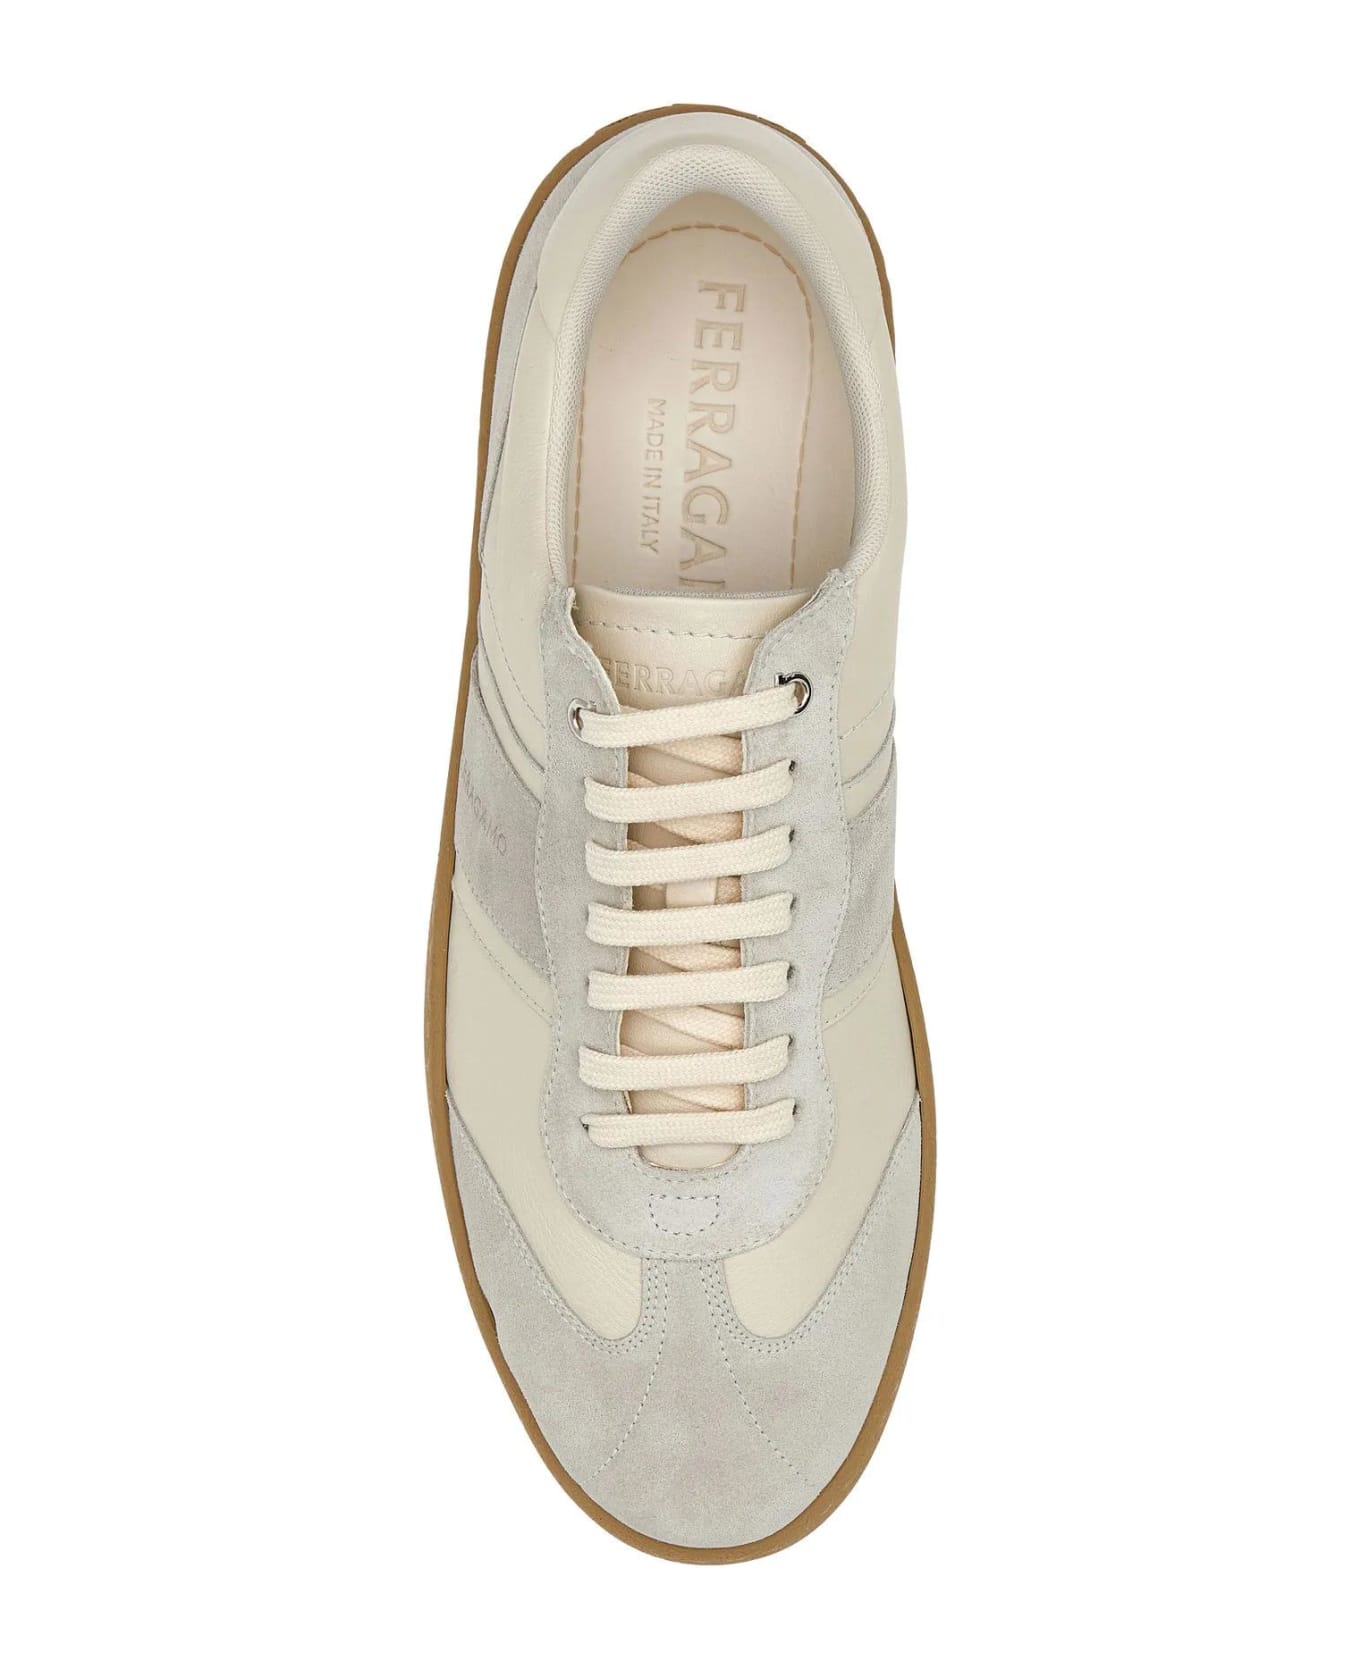 Ferragamo Two-tone Leather And Suede Achille Sneakers - White スニーカー